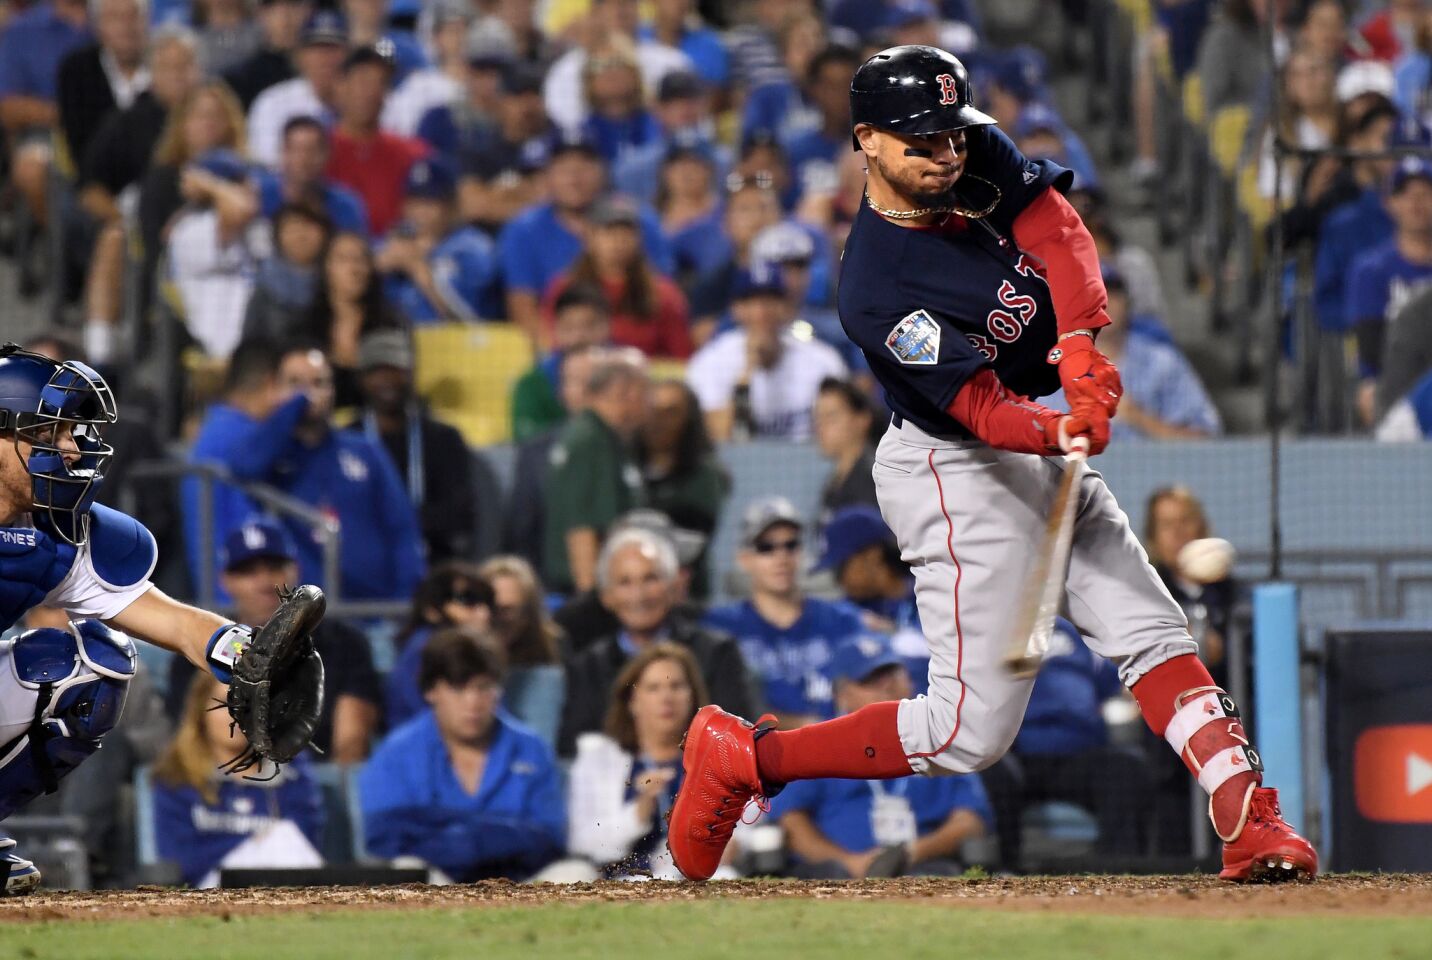 Red Sox center fielder Mookie Betts connects for a solo home run off Dodgers pitcher Clayton Kershaw during the sixth inning.